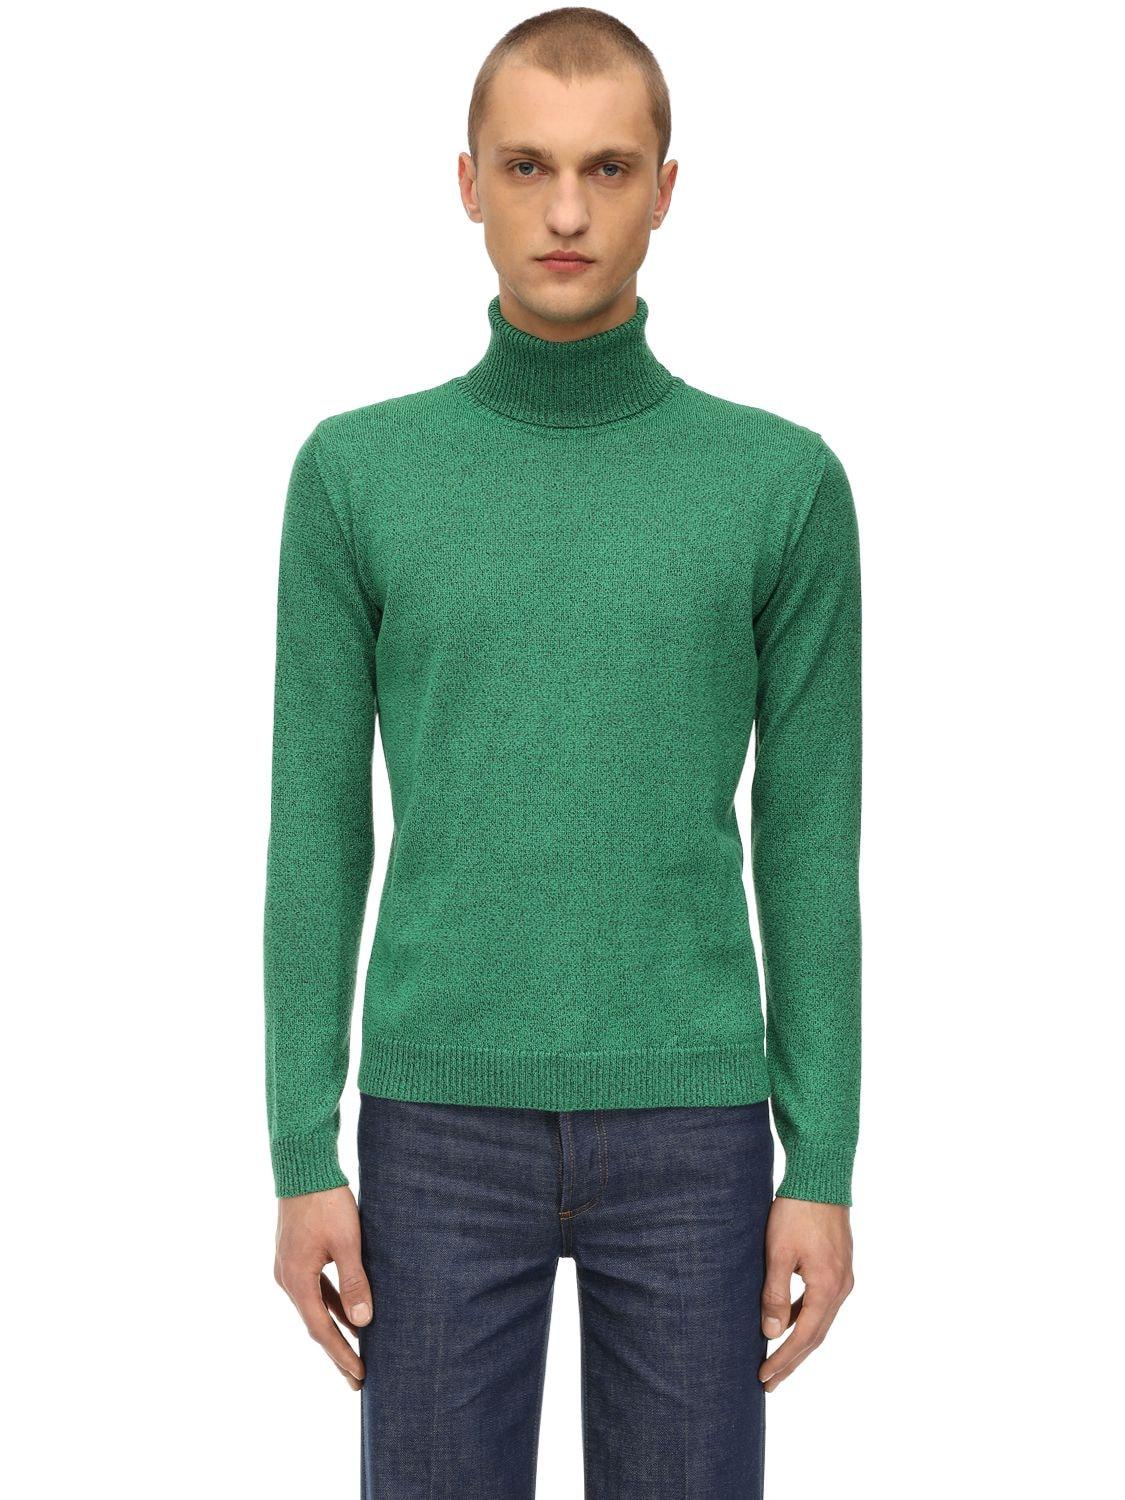 Gucci Lurex Cable Knit Turtleneck Sweater in Green for Men - Lyst